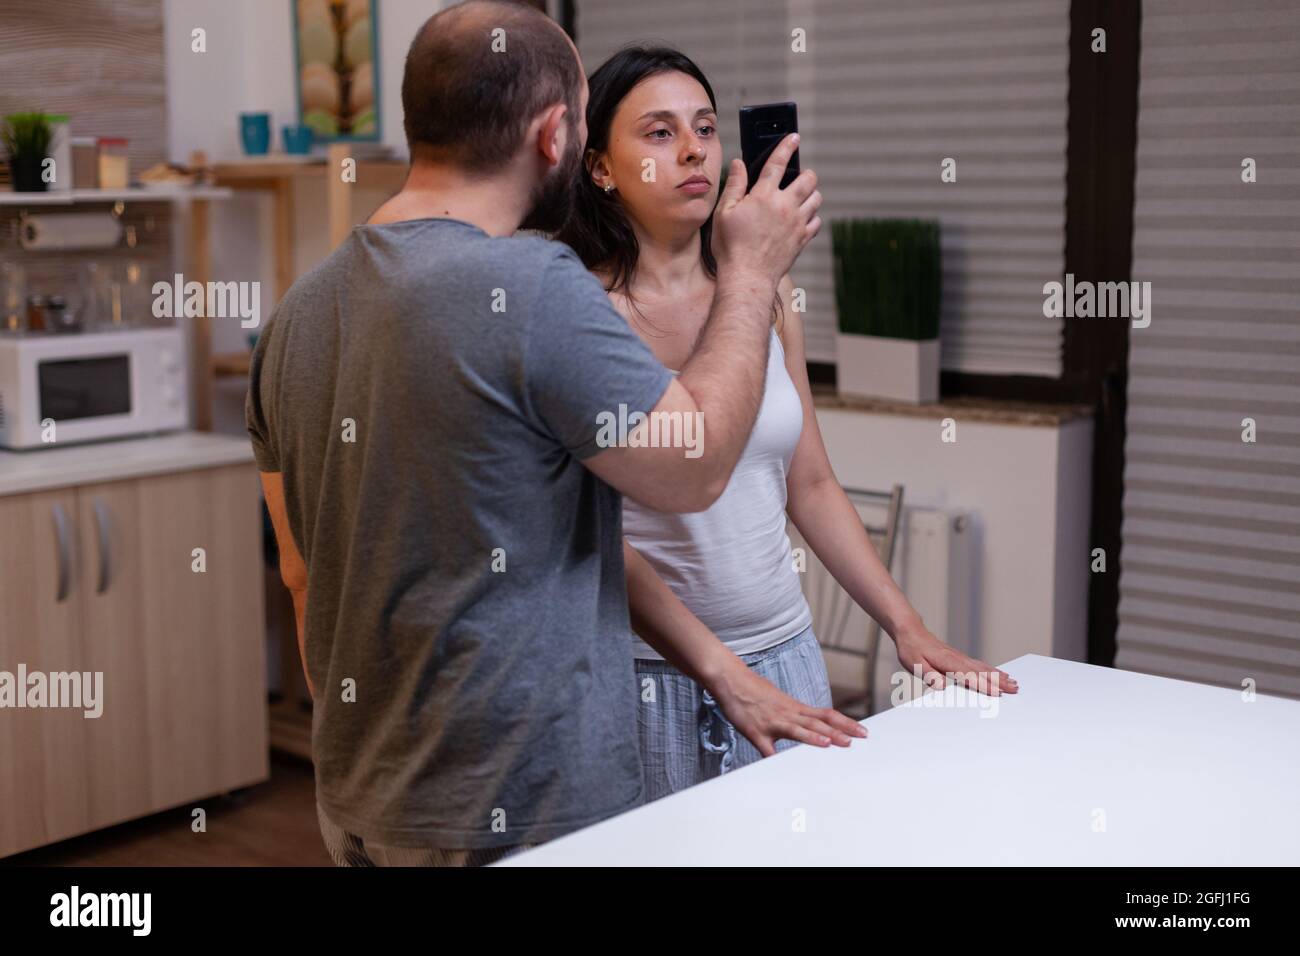 Angry jealous husband cheated by unhappy wife, couple fighting because of secret text messages with lover. Man showing smartphone with cheating proof to woman. Marriage infidelity. Stock Photo